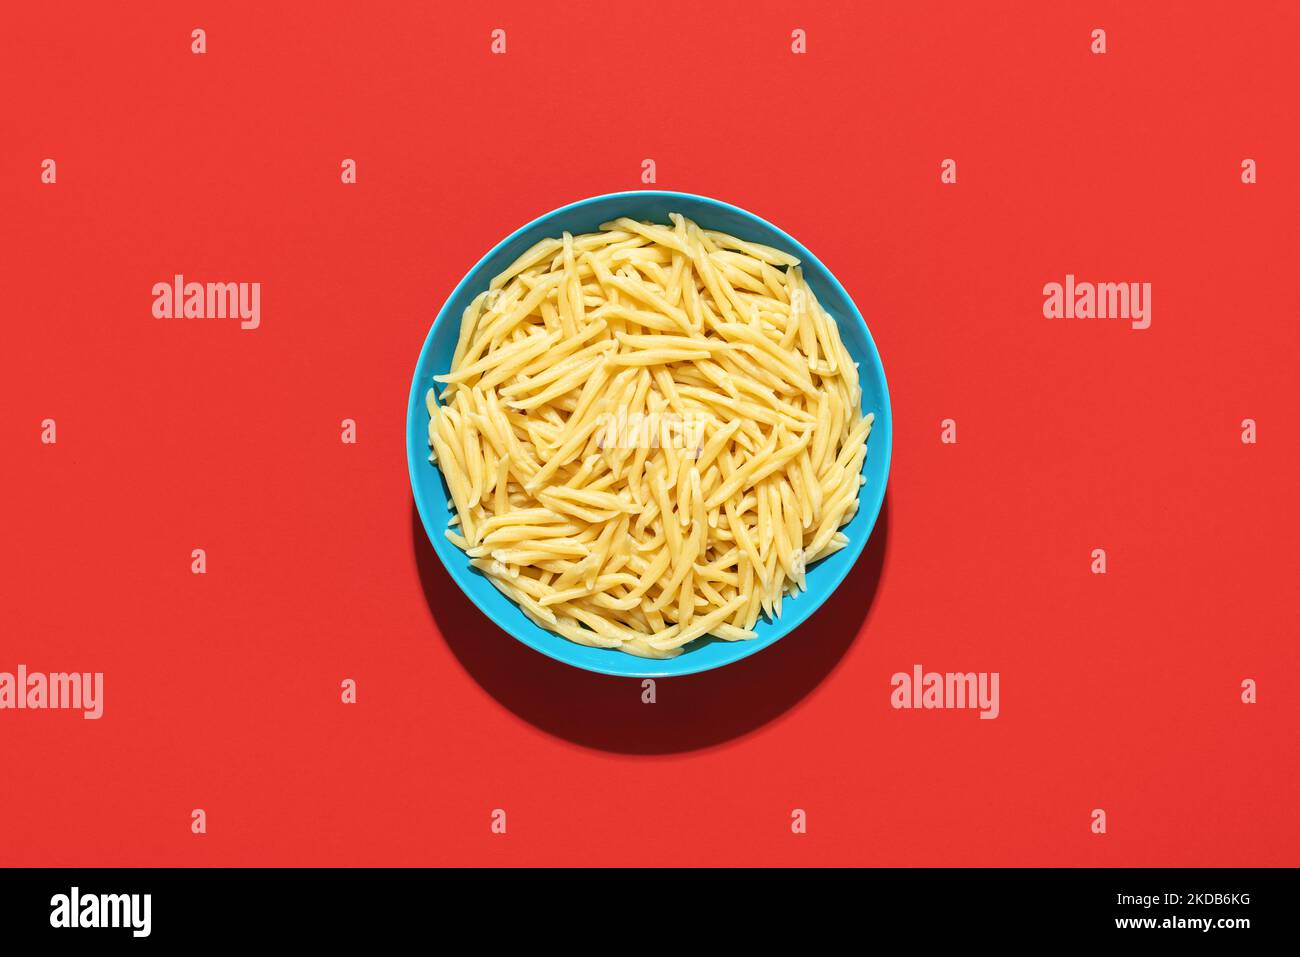 Trofie pasta with no sauce minimalist on a red background. Italian short pasta, called Trofie, in a bowl on a vibrant-colored table. Stock Photo